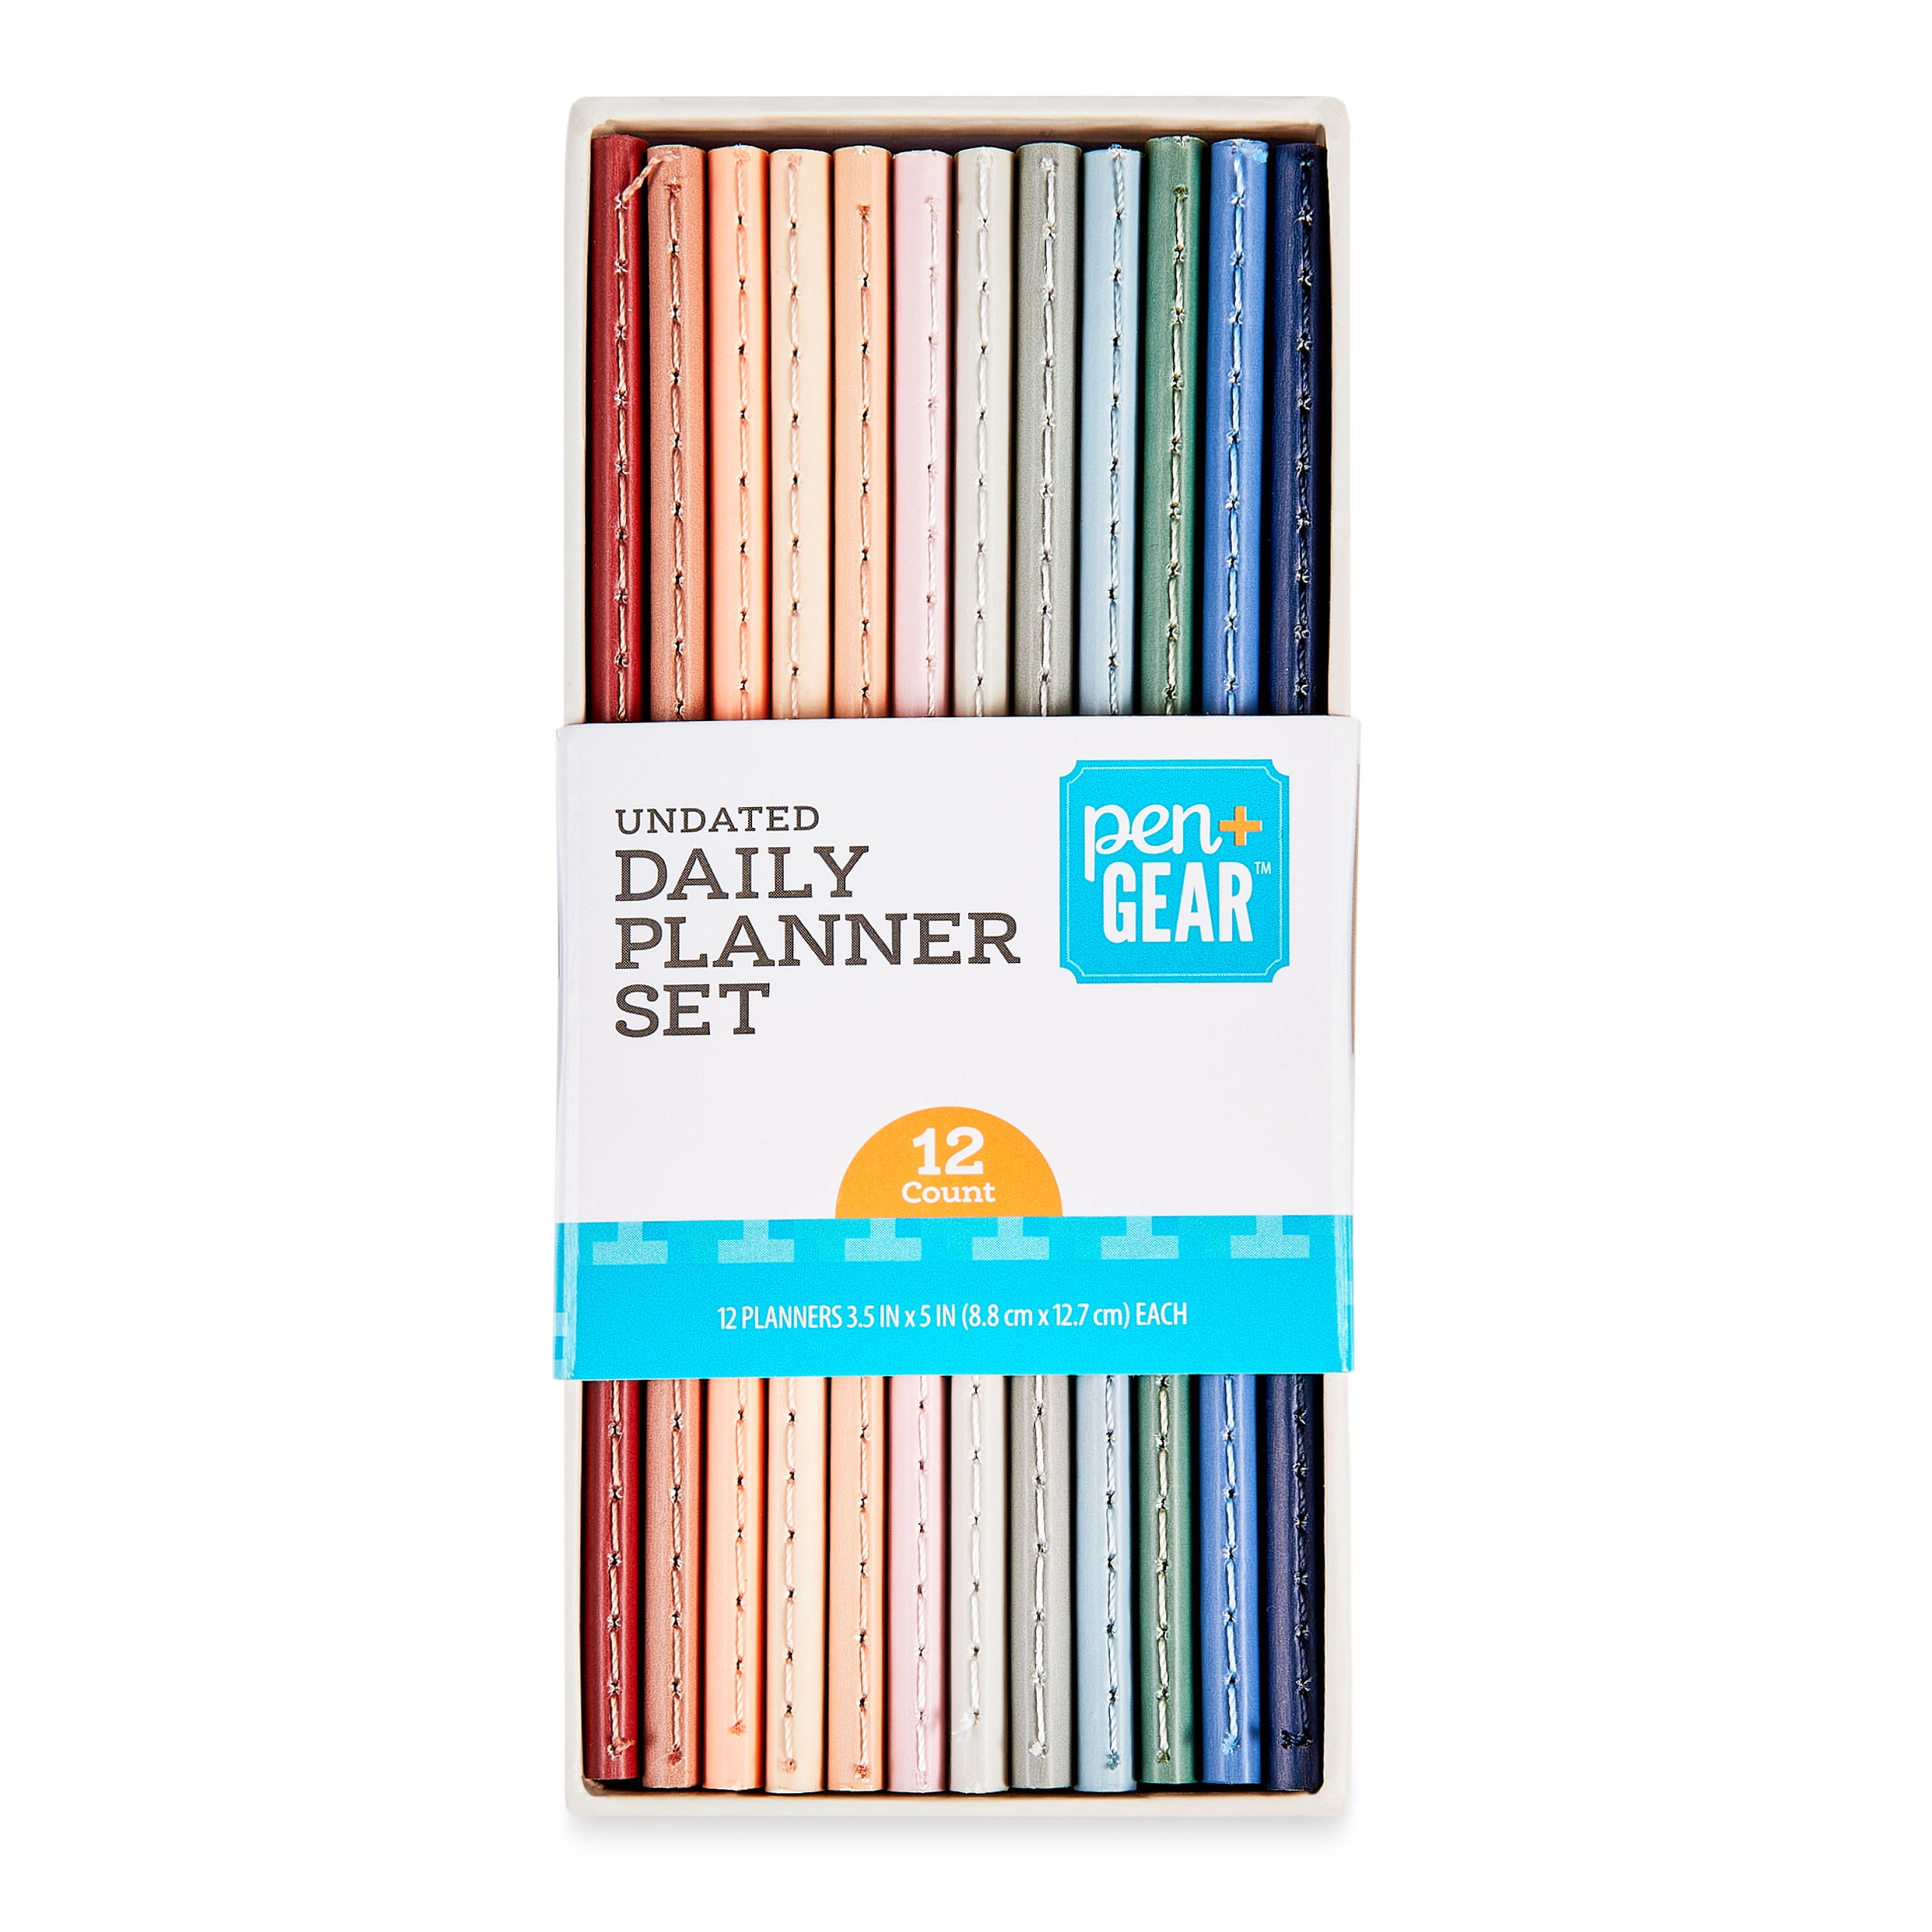 Pen + Gear Undated Daily Planners, Multi-Color, 3.5 in x 5 in, 12